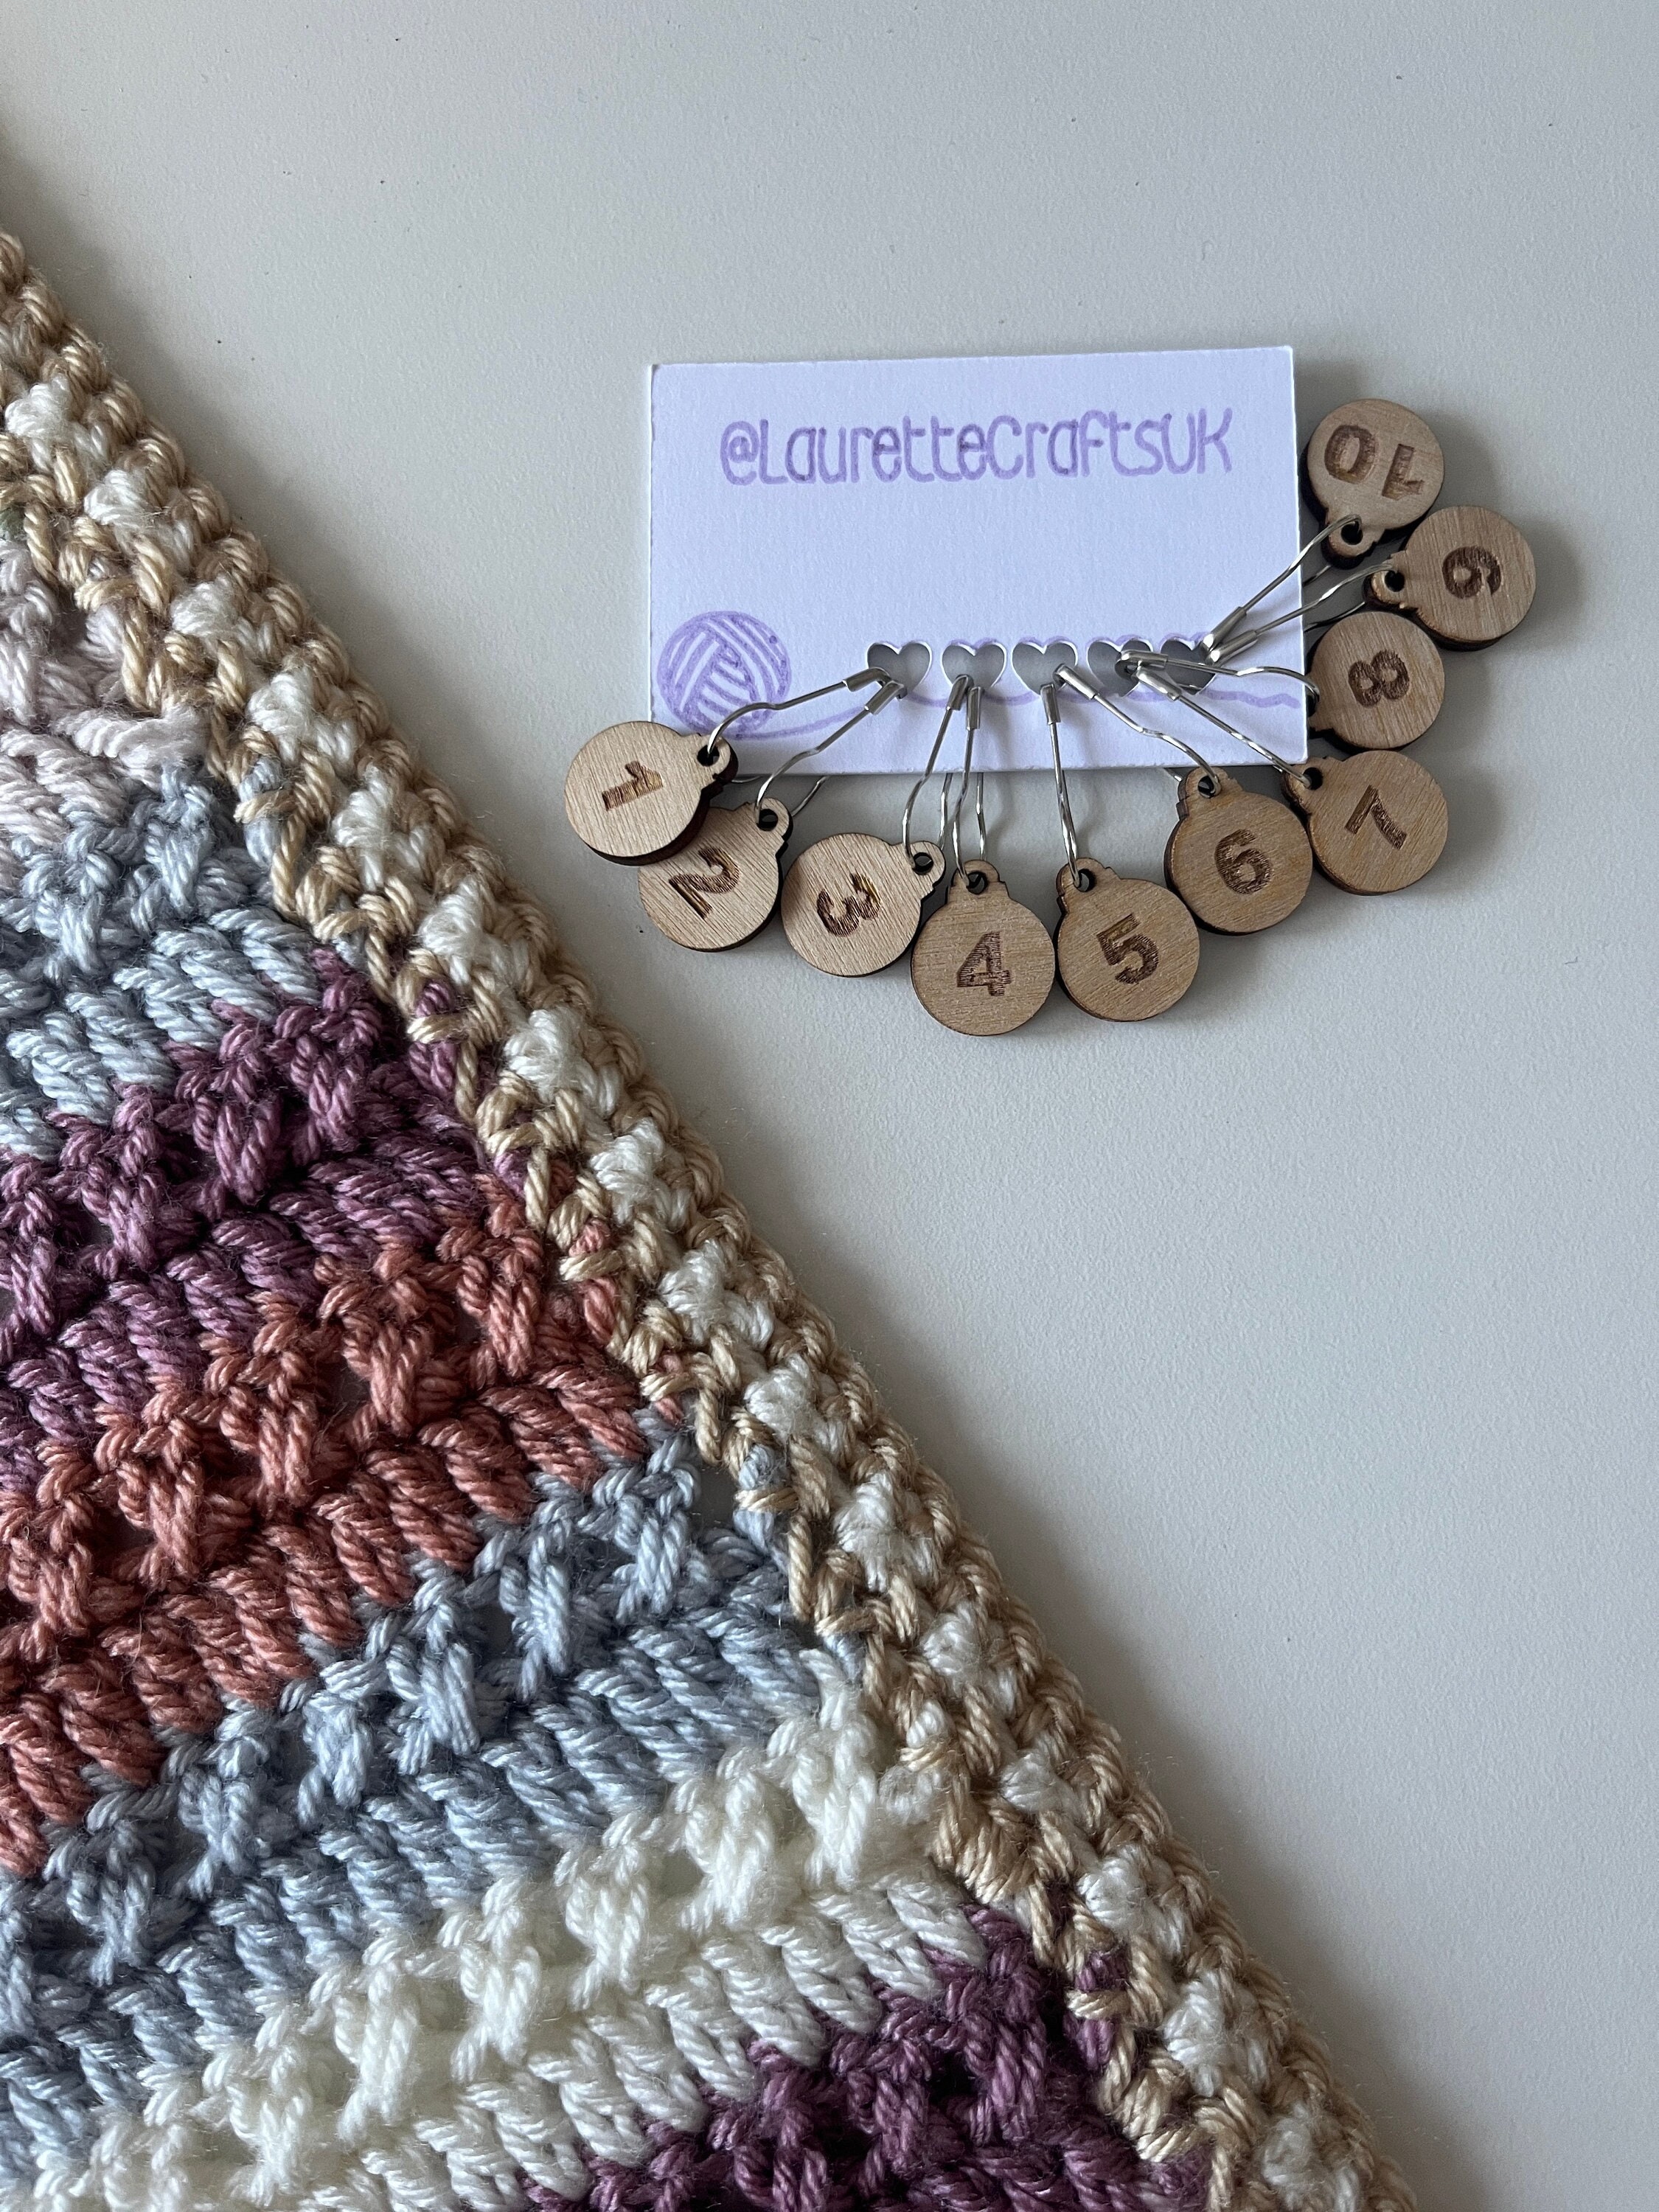 Row Counters Stitch Counters Crochet Knitting 2 Sizes of Sets Purple Stitch  Markers Count Keeper Flos Crafty Crochet 